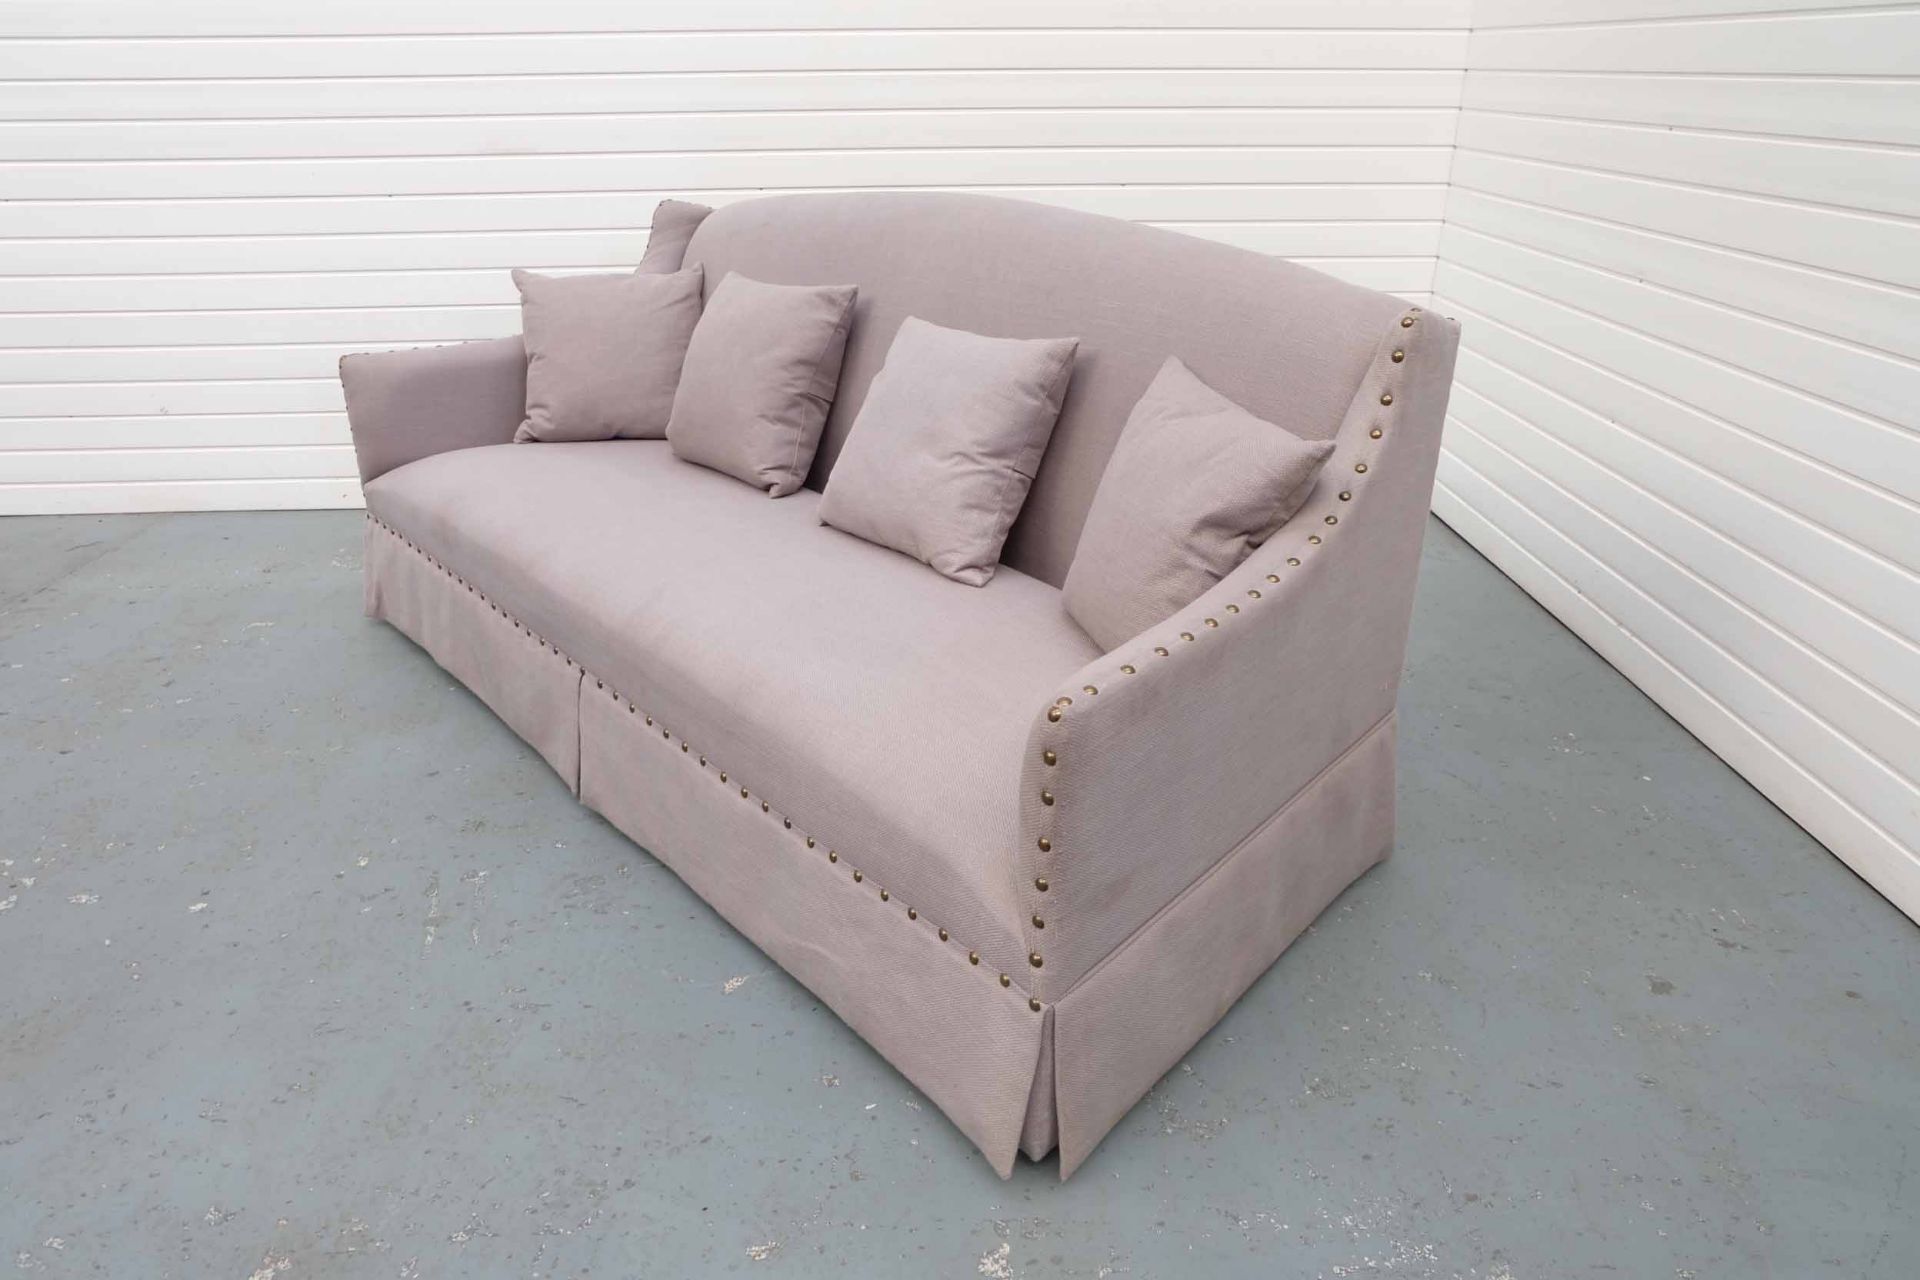 Coach House 3 Seater Sofa. With Valance. Includes 4 Scatter Cushions. - Image 2 of 4